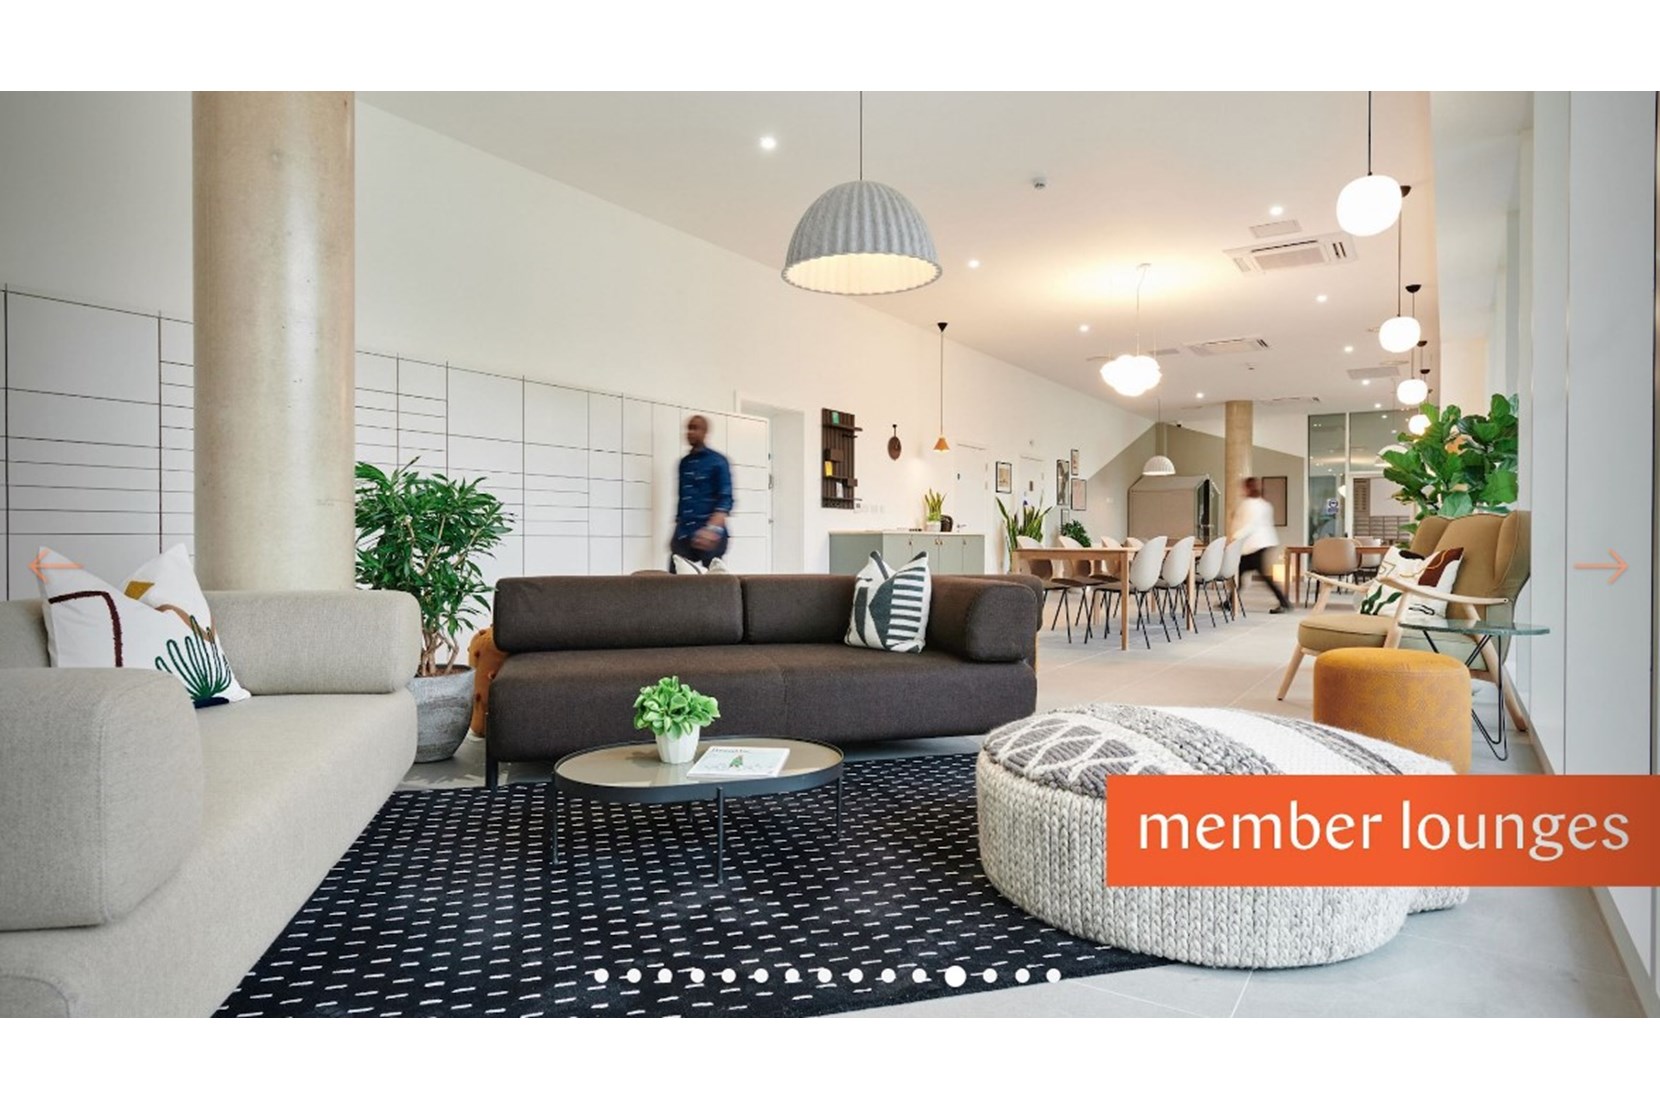 Apartment-APO-Group-Barking-Greater-London-Member-Lounges-1